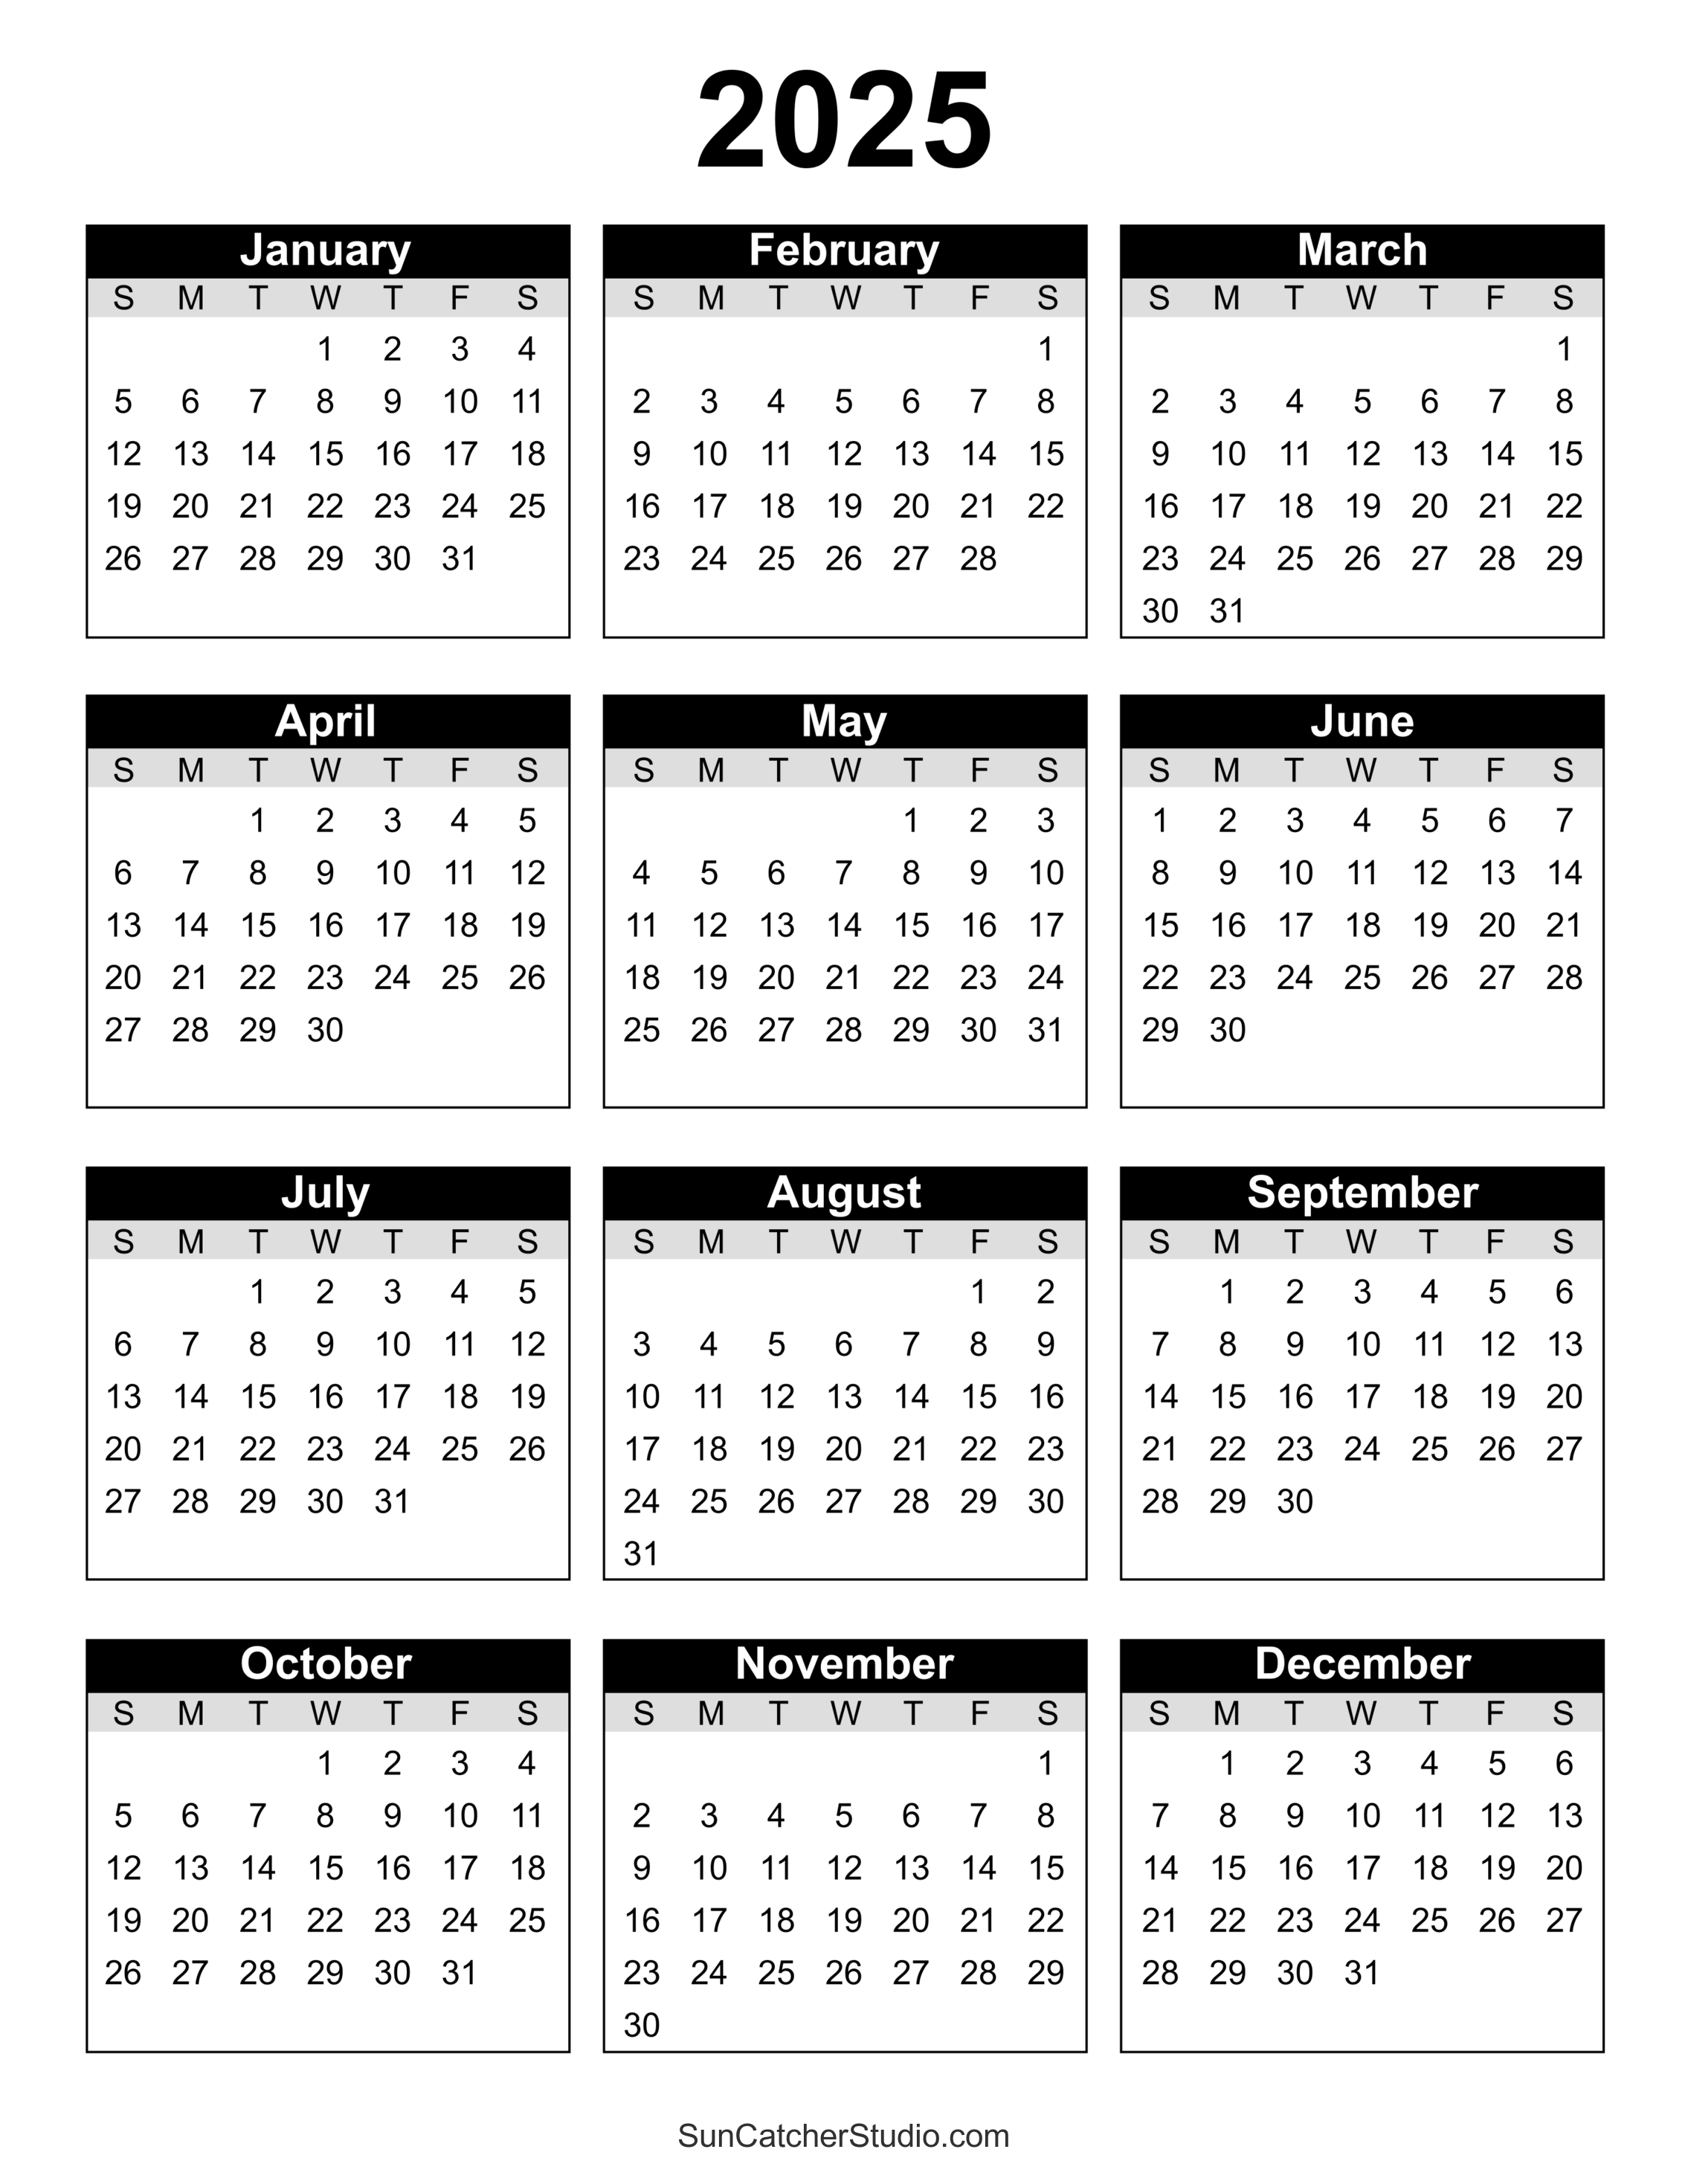 Free Printable 2025 Yearly Calendar – DIY Projects, Patterns, Monograms ...